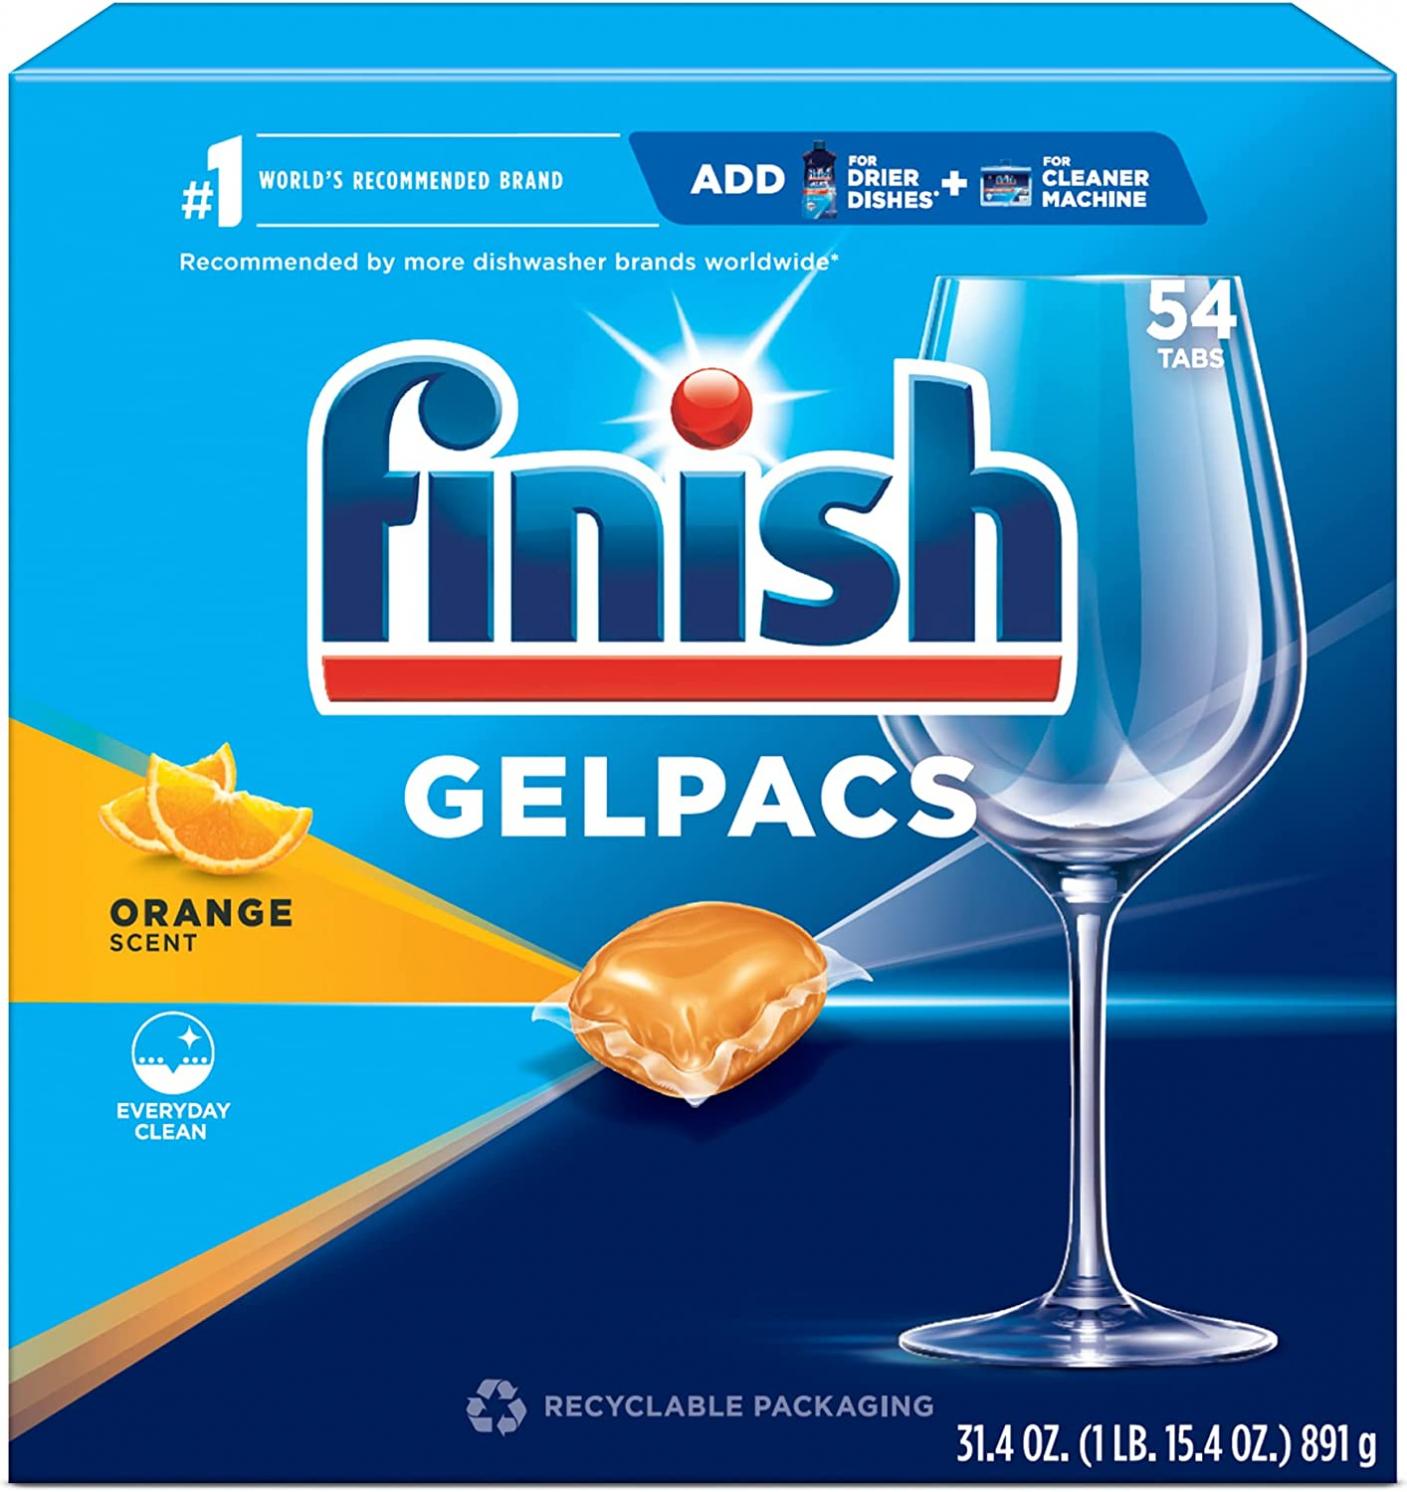 Finish All in 1 Gelpacs, Dishwasher Detergent Tablets, Orange, 32 Count